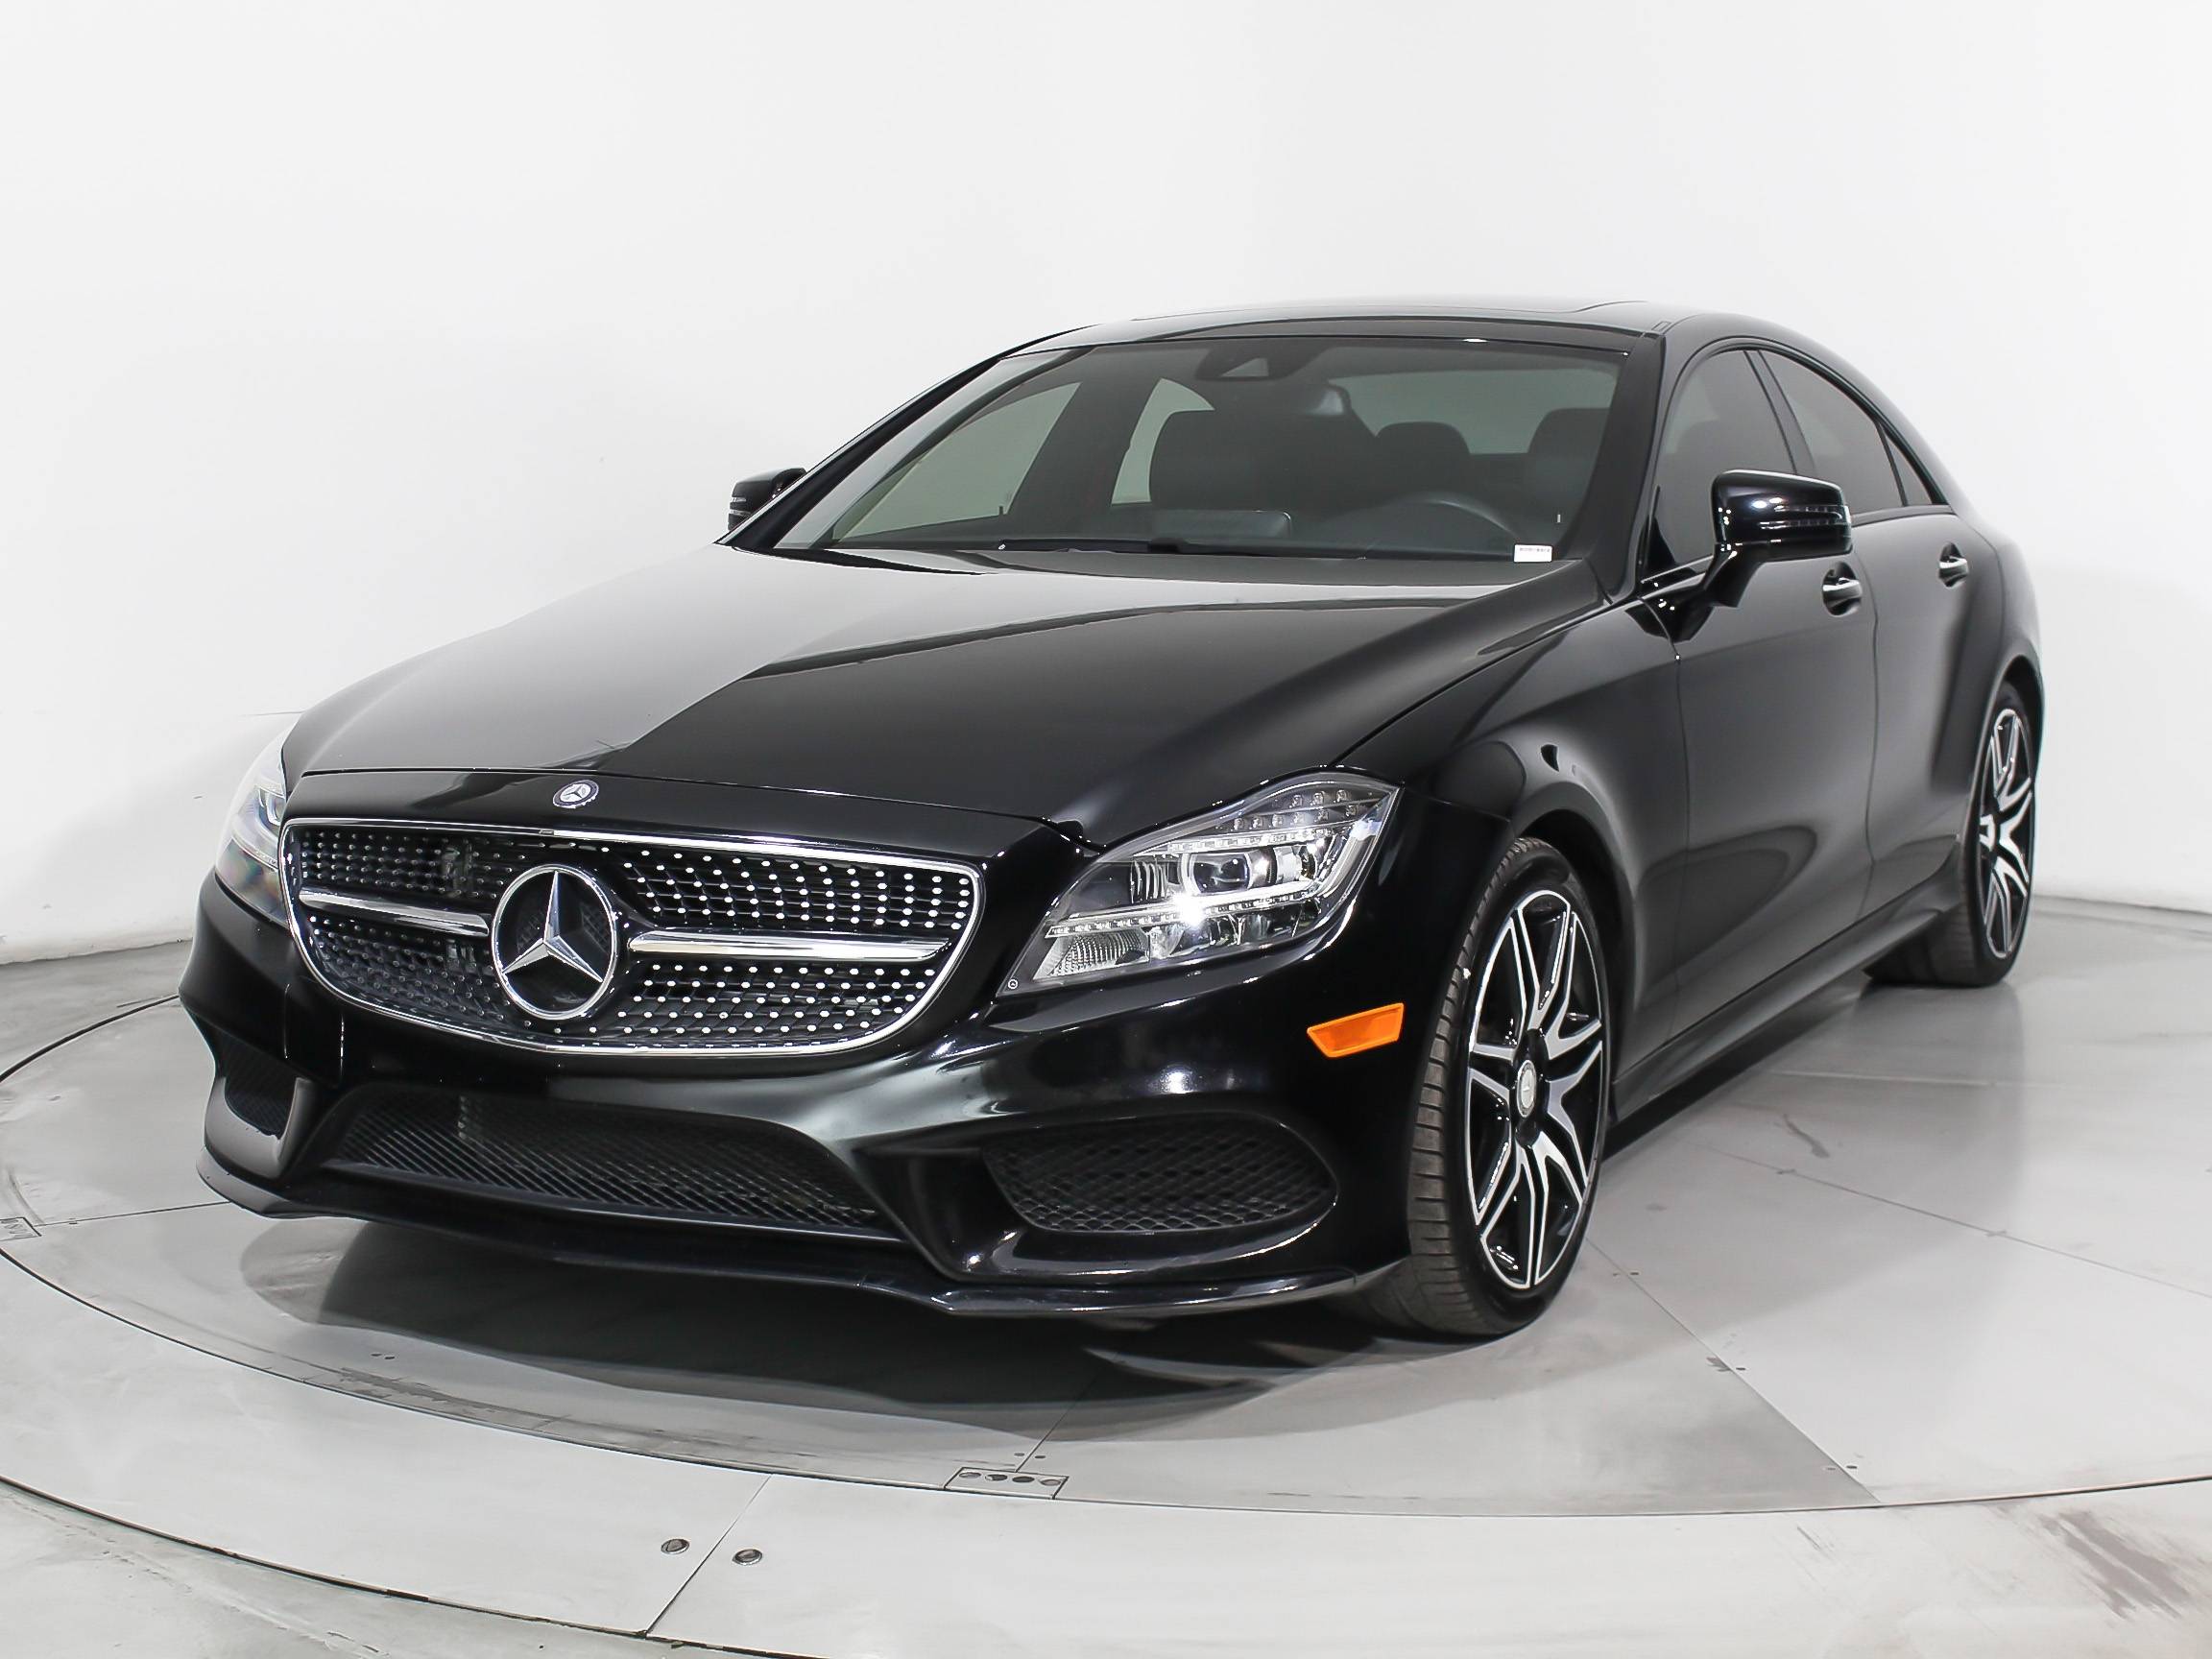 Used 2016 MERCEDES-BENZ CLS CLASS CLS400 for sale in MIAMI | 103738